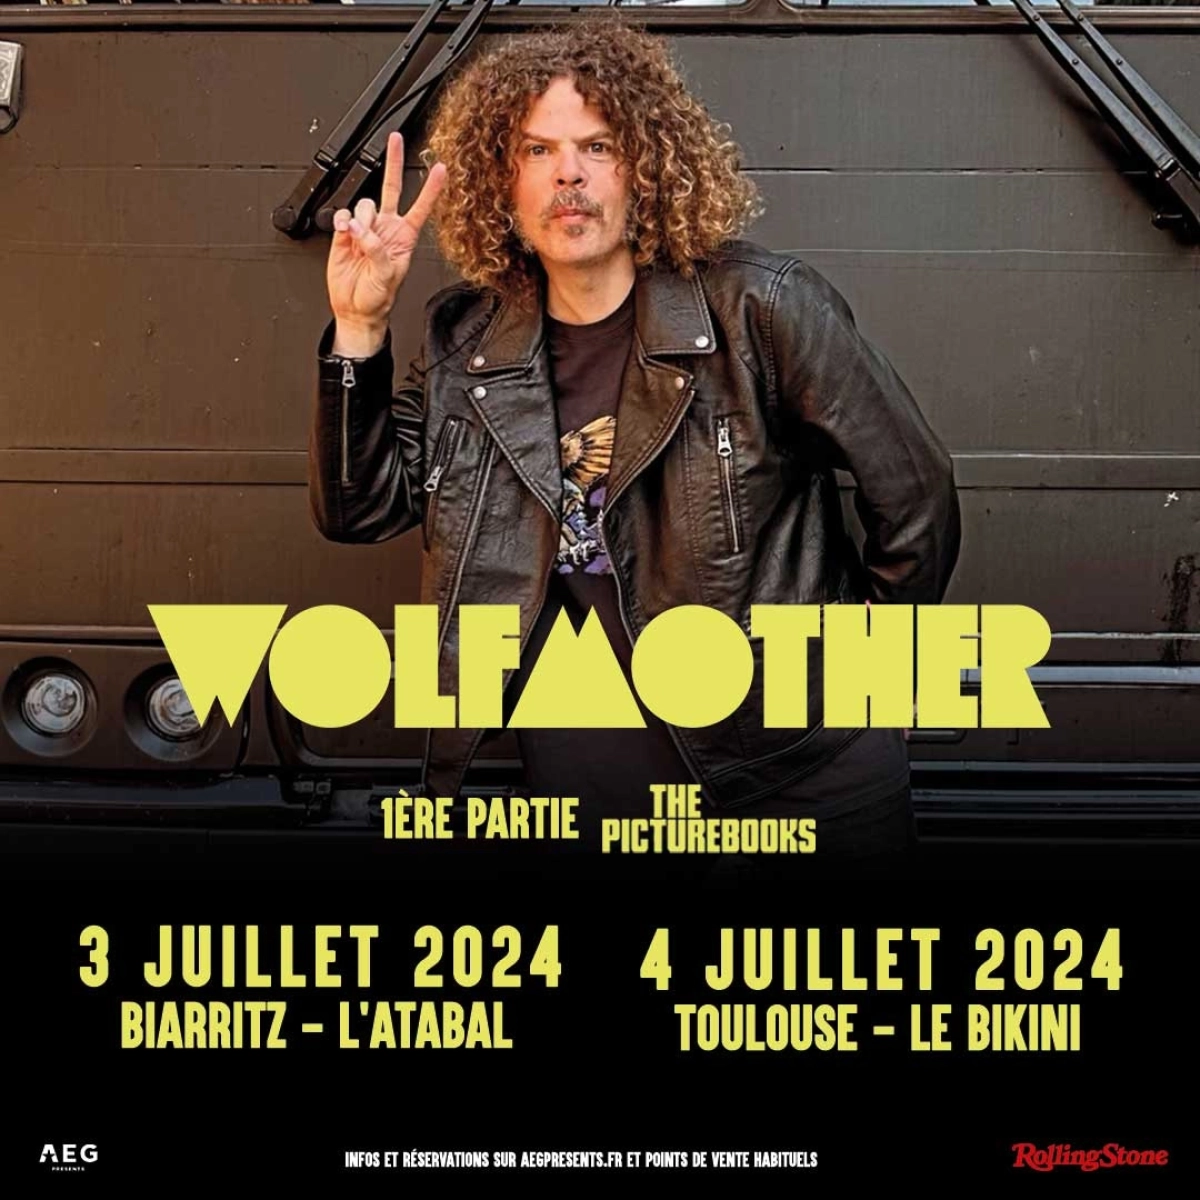 Wolfmother in der Atabal Tickets